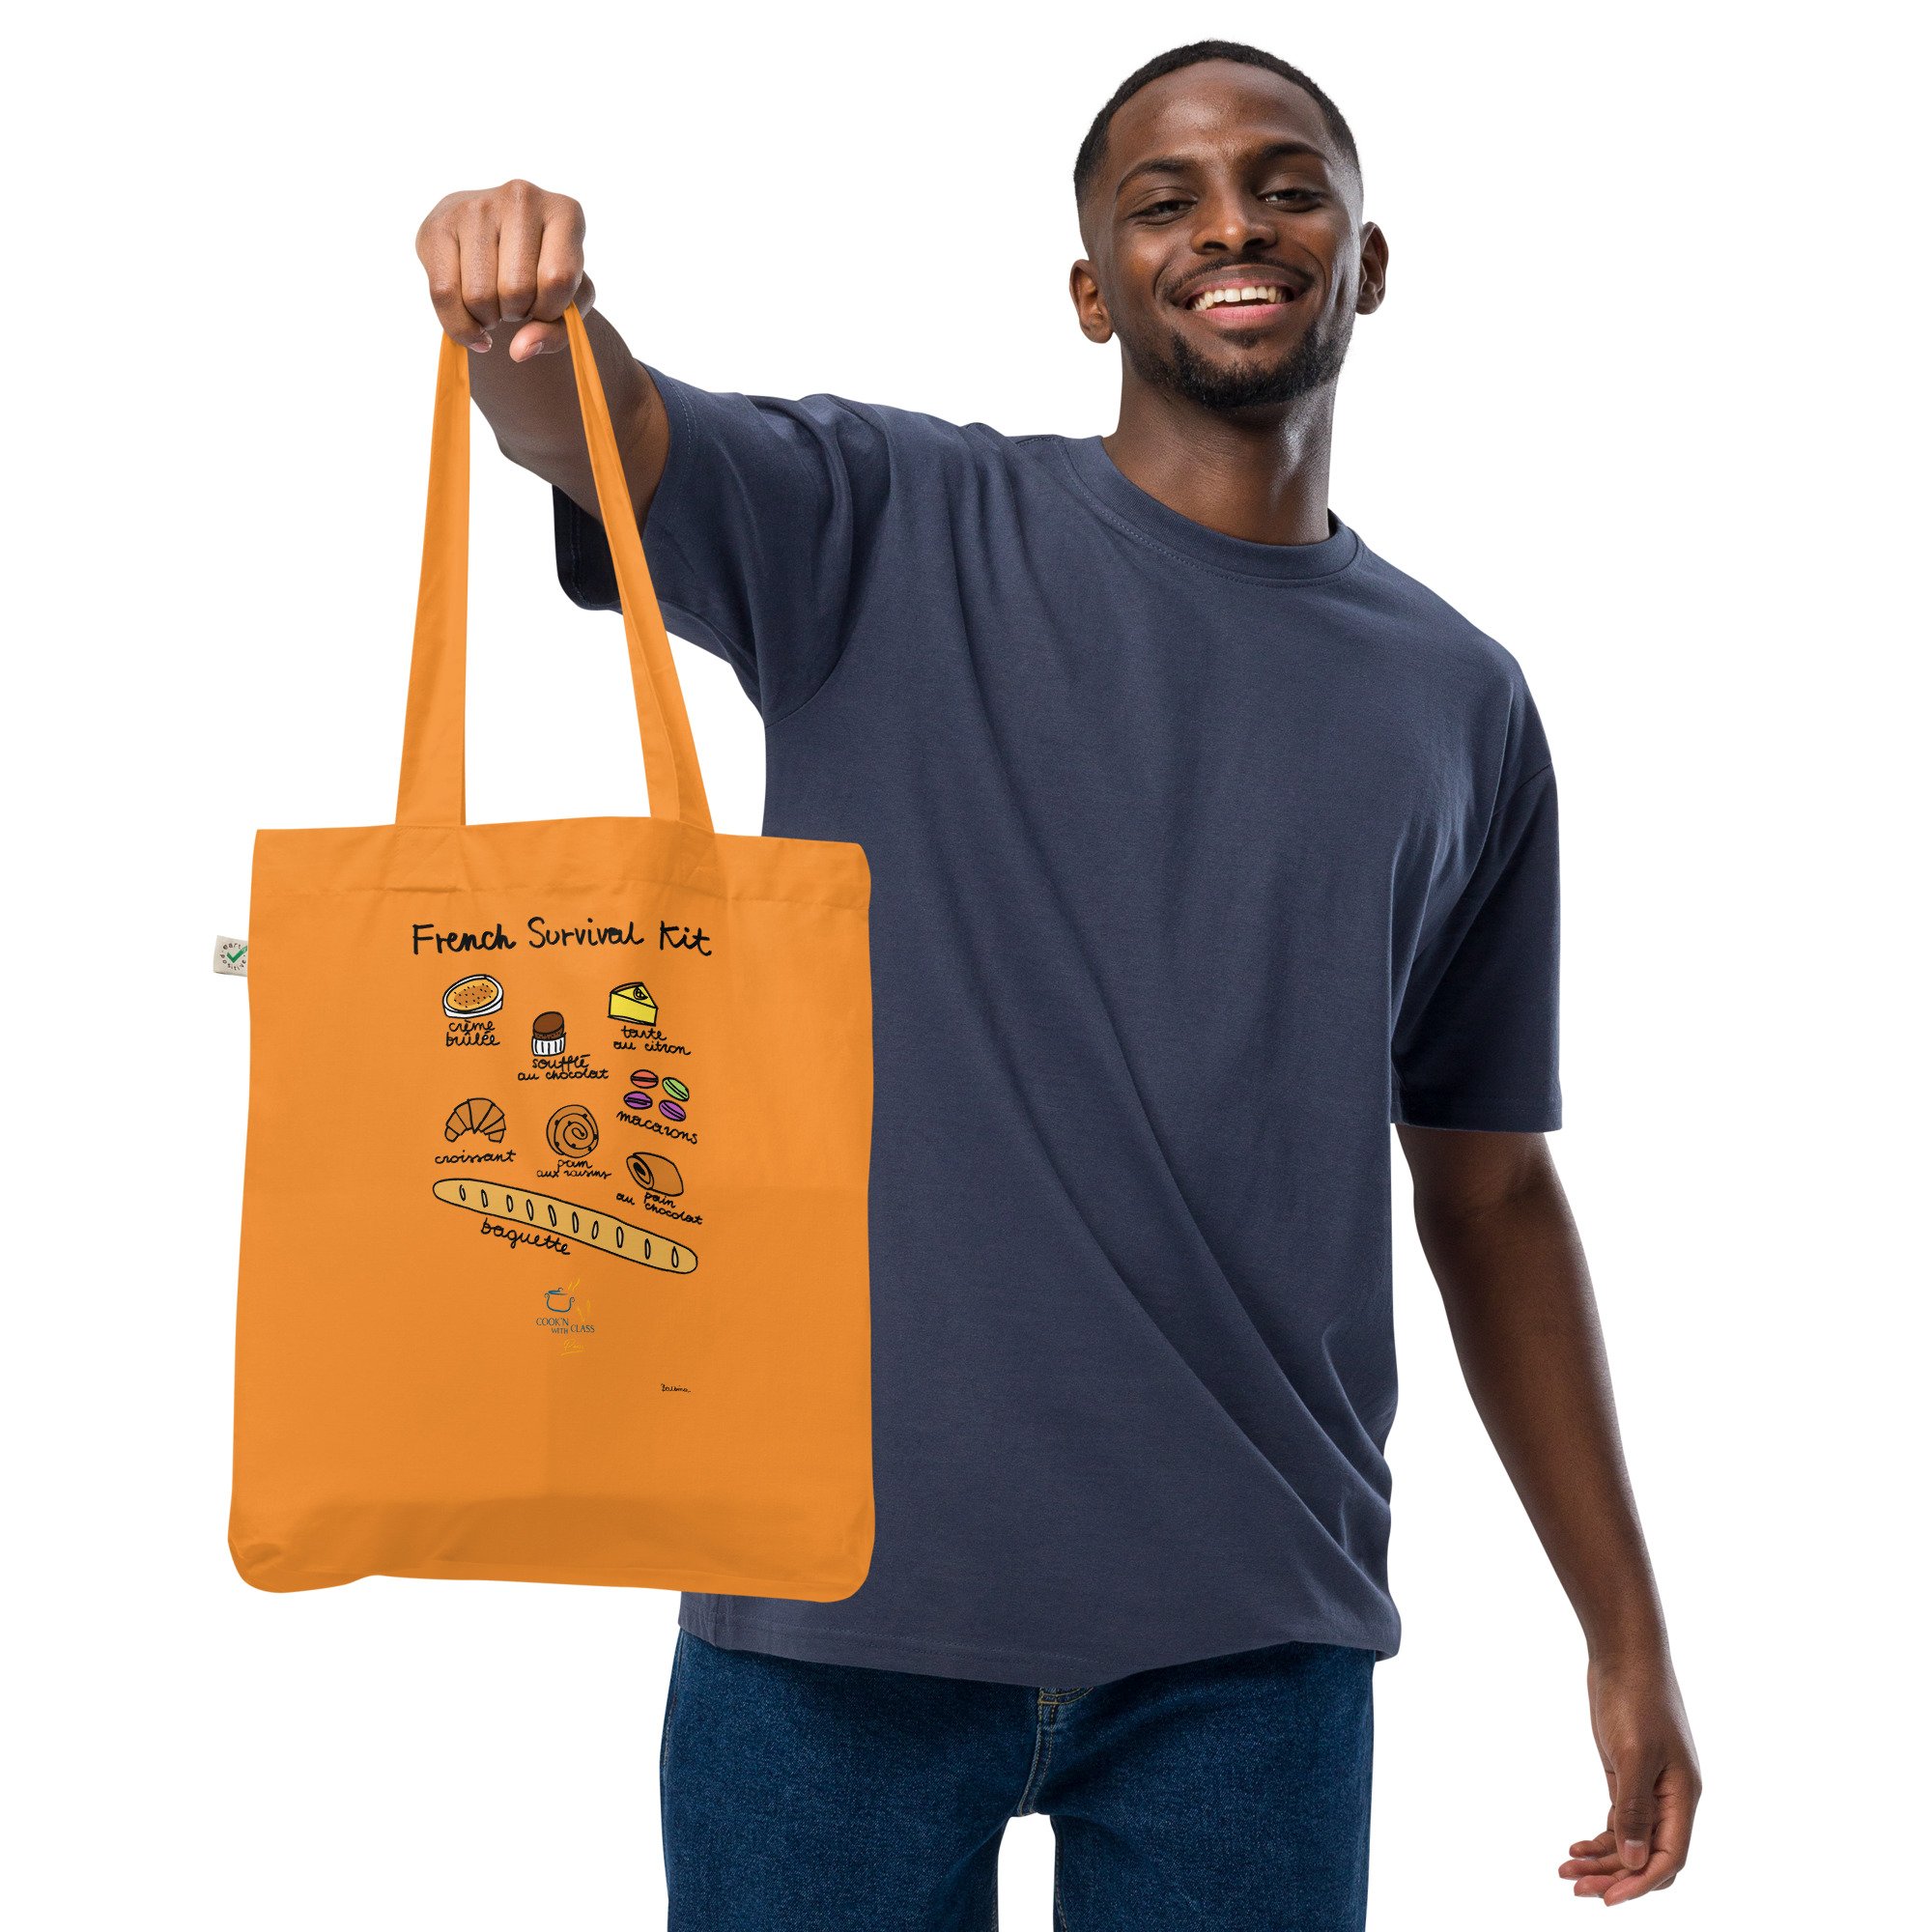 PERSONALISED YELLOW ORGANIC COTTON CANVAS TOTE BAG